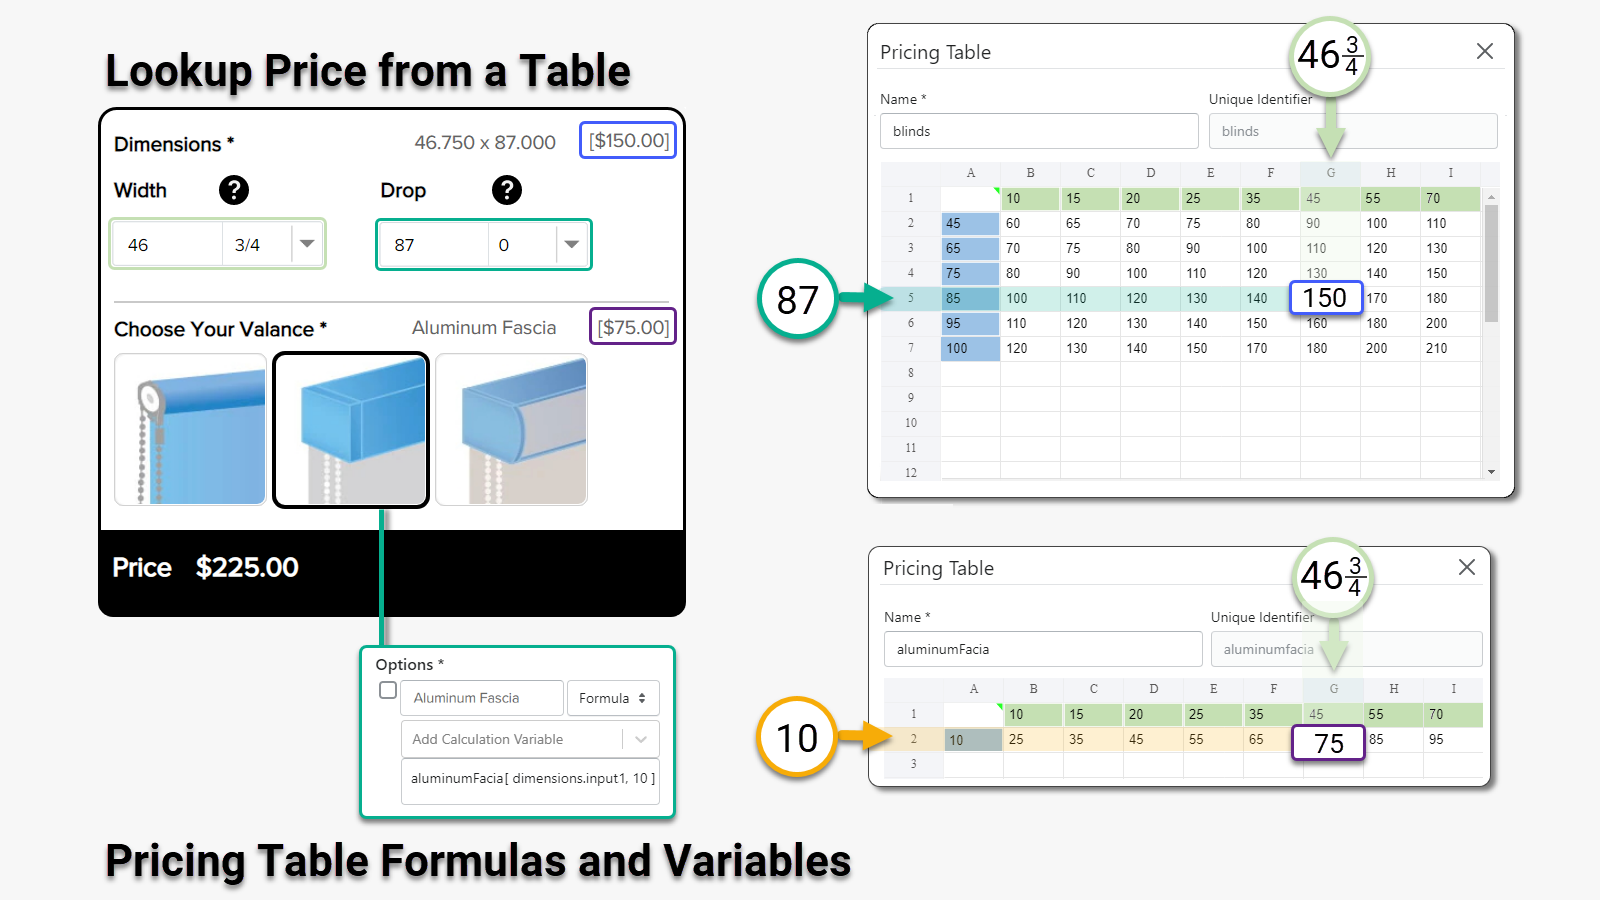 Use pricing tables and formulas to calculate price